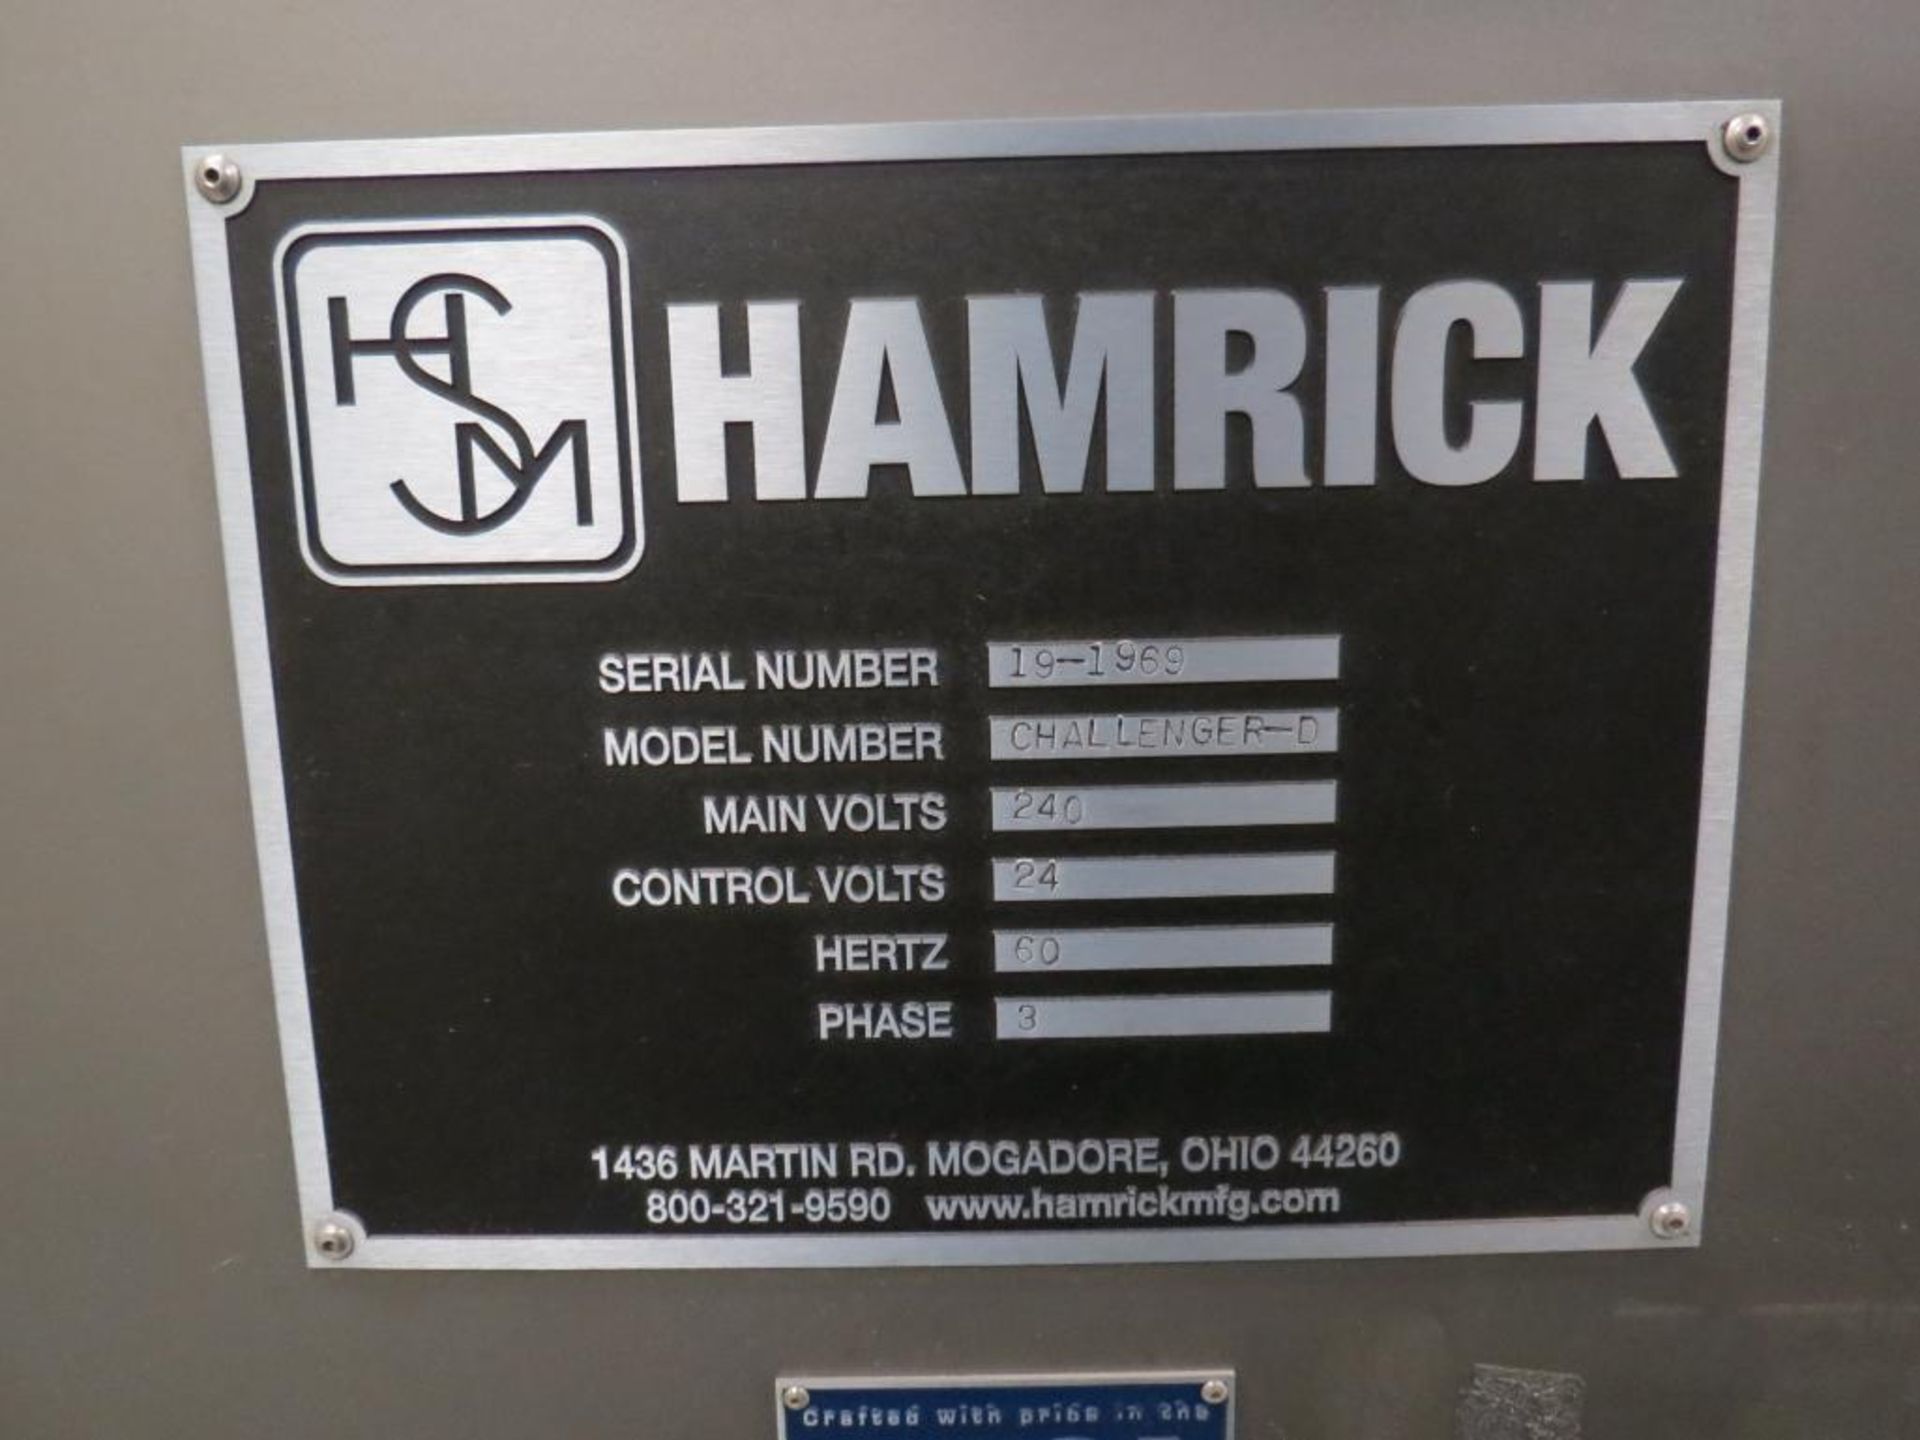 Hamrick Case Packer & Control System, SN: 19-1969, Q) Part of Complete Packaging Line - Image 9 of 9